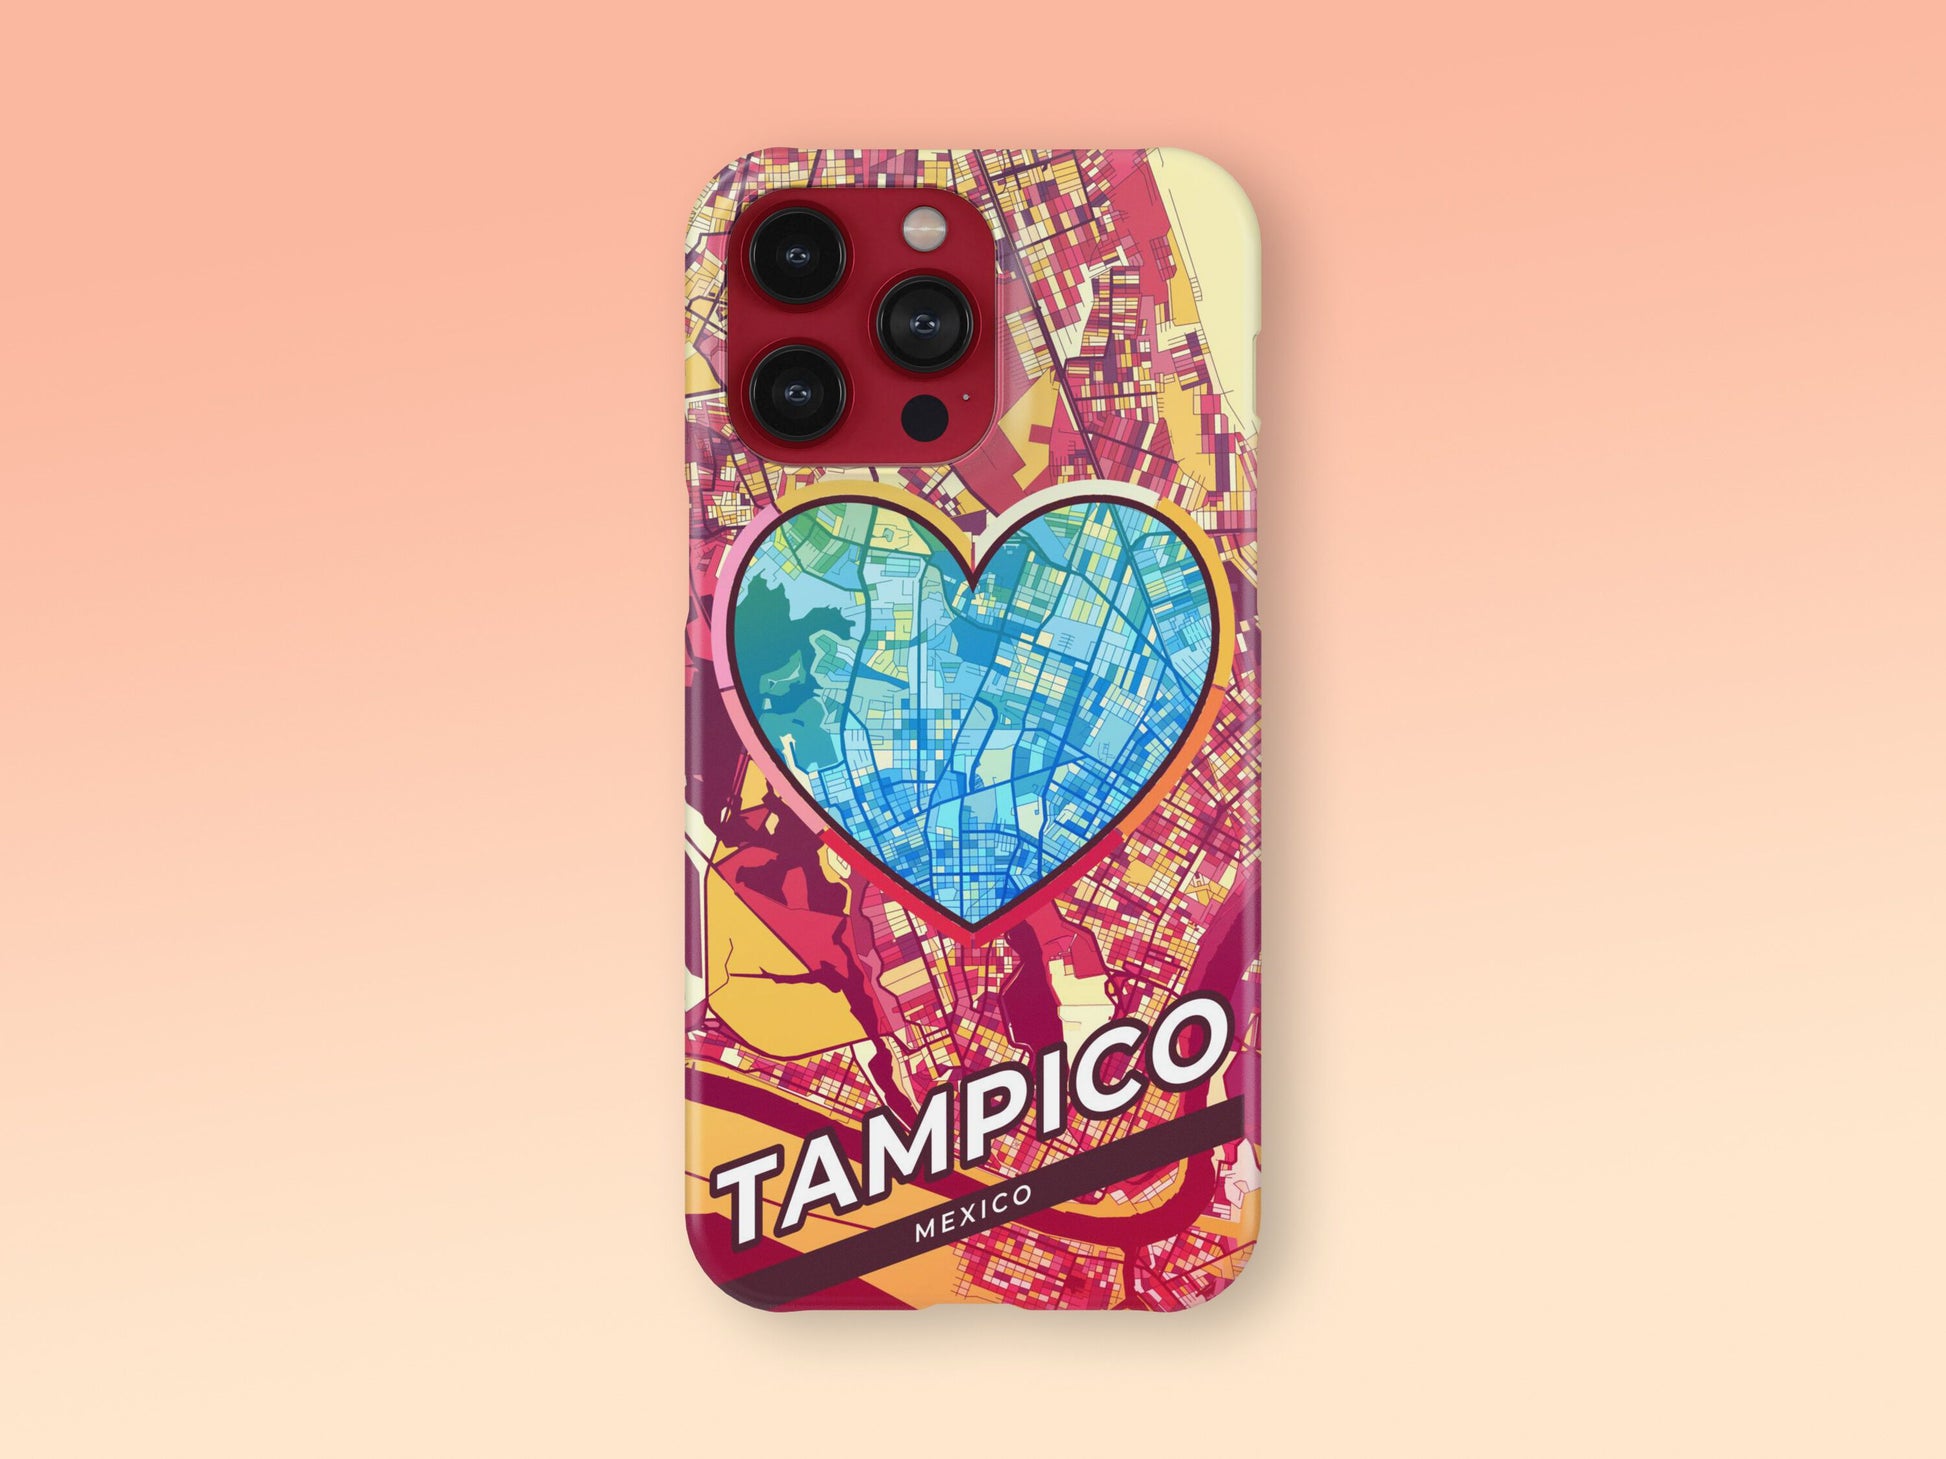 Tampico Mexico slim phone case with colorful icon 2